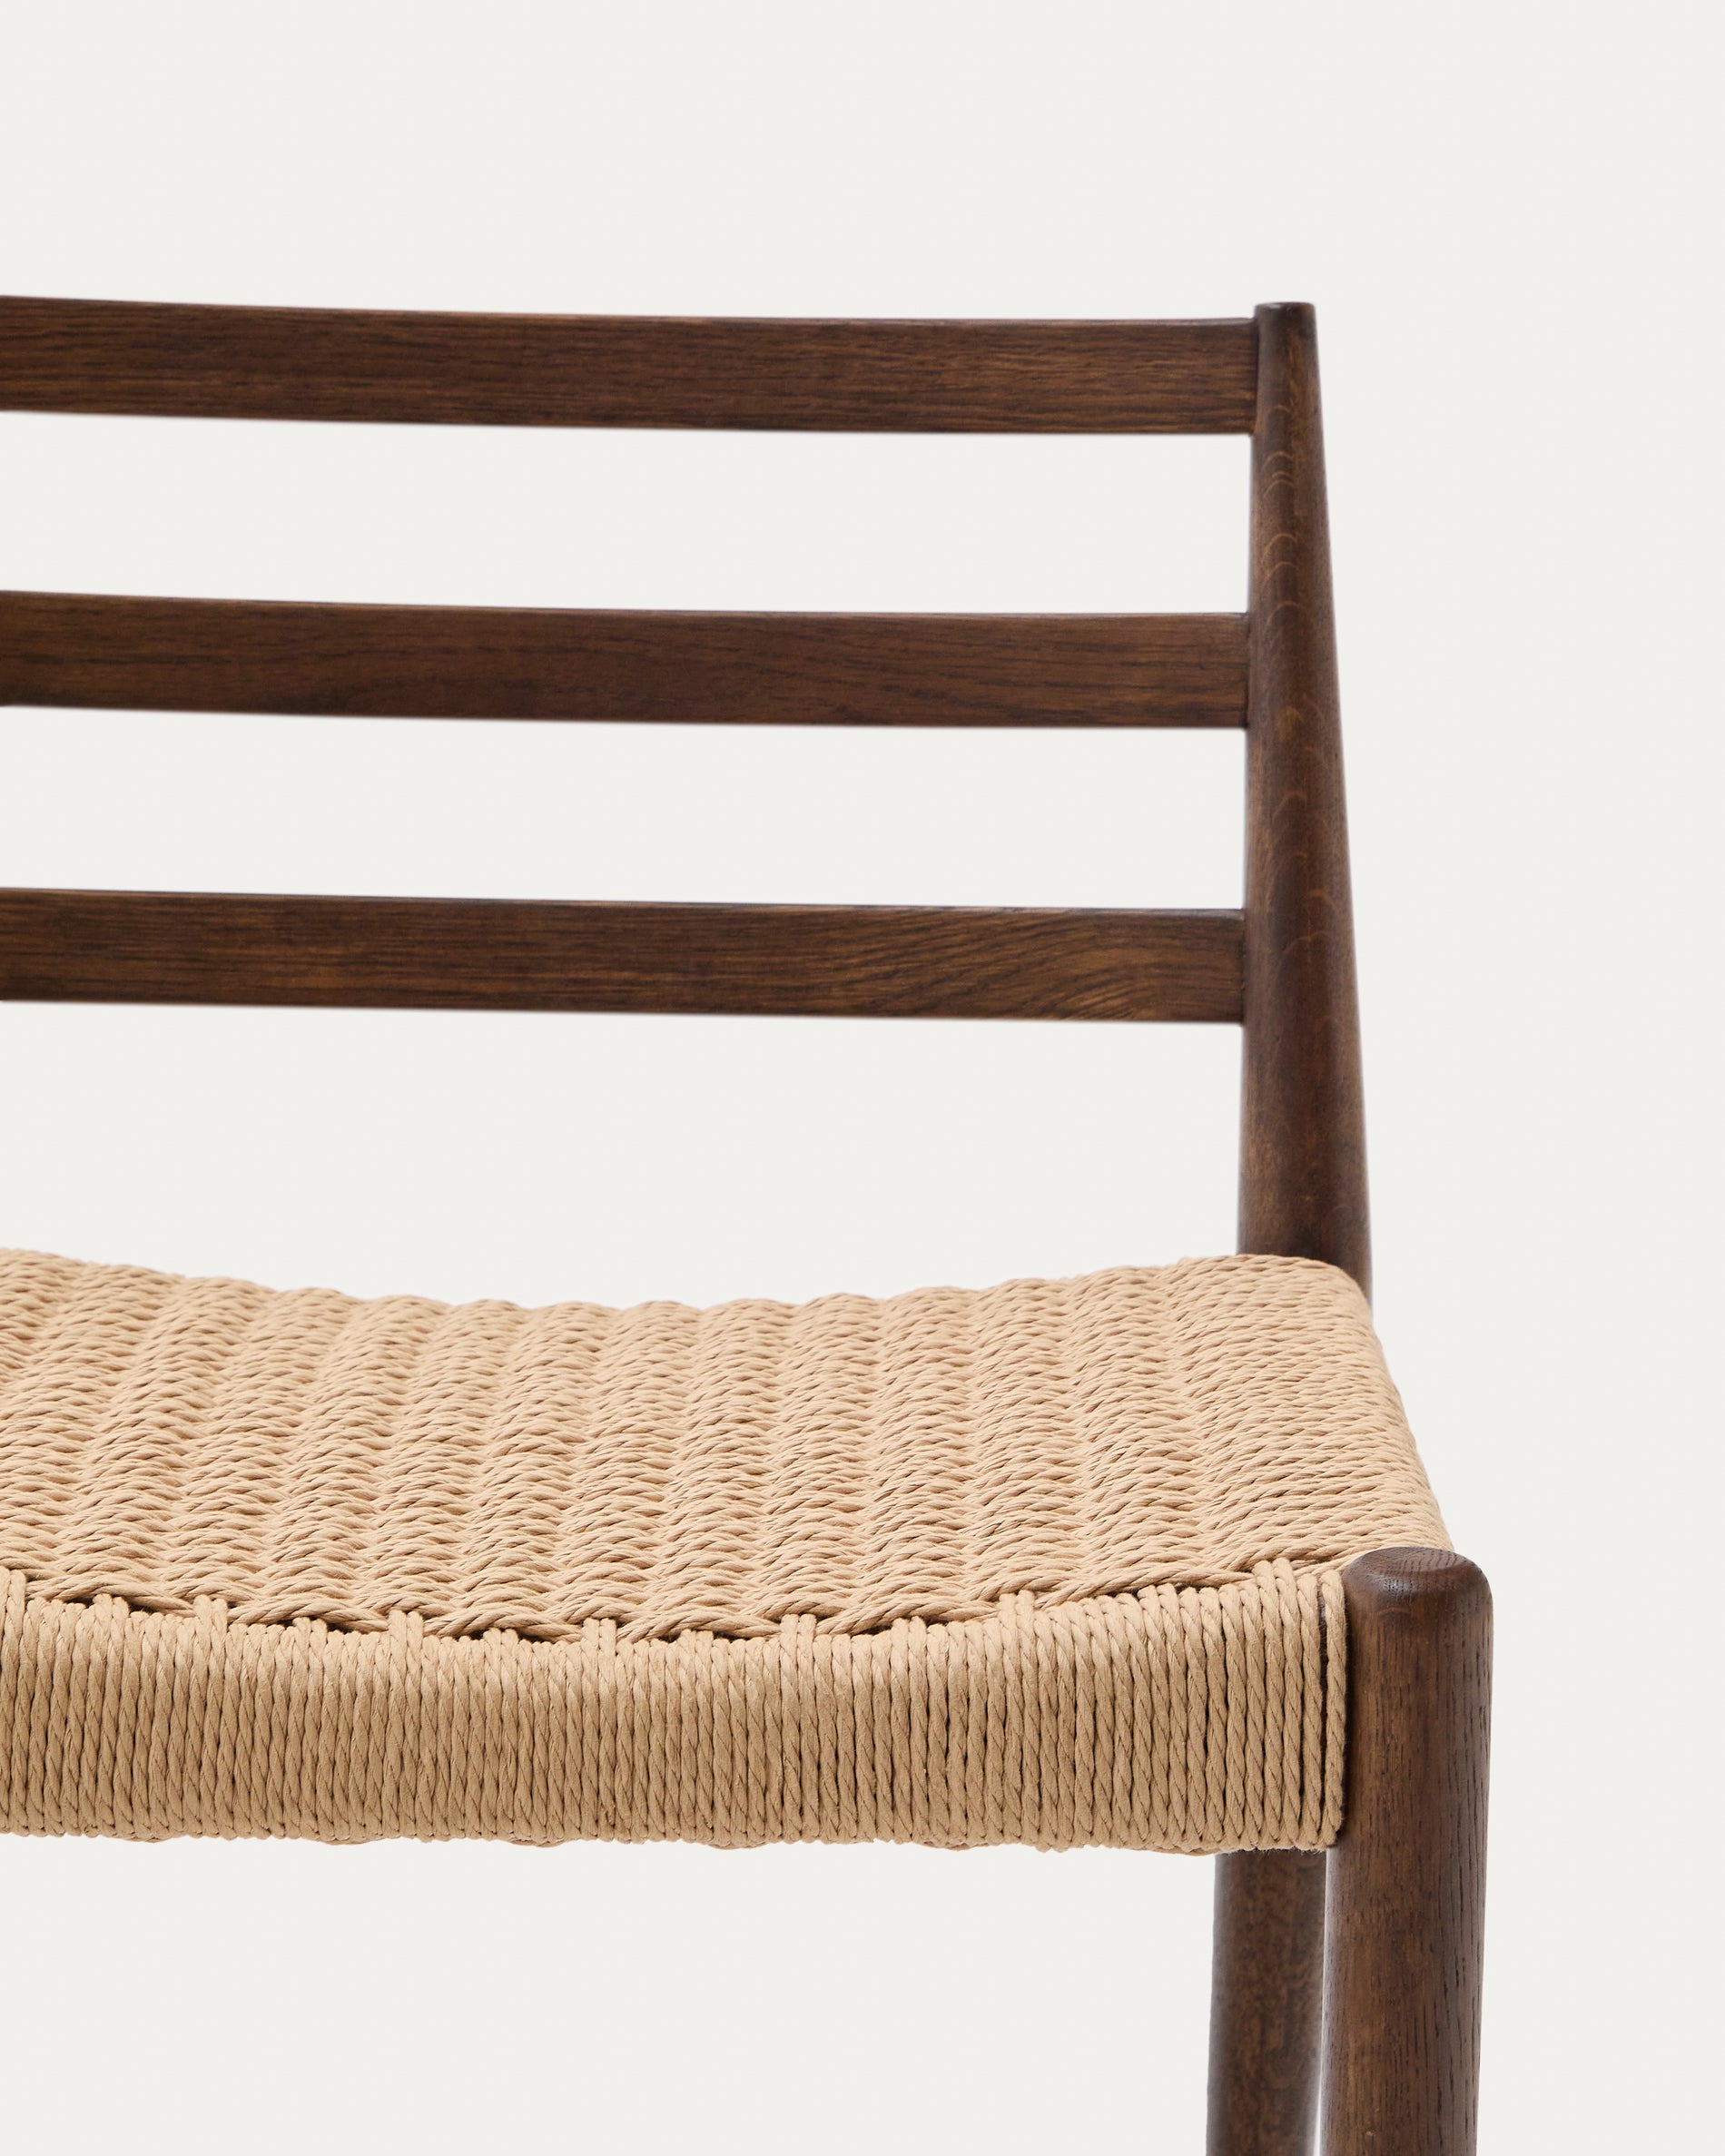 Analy chair with back, solid oak with walnut finish and rope seat, 70 cm 100% FSC